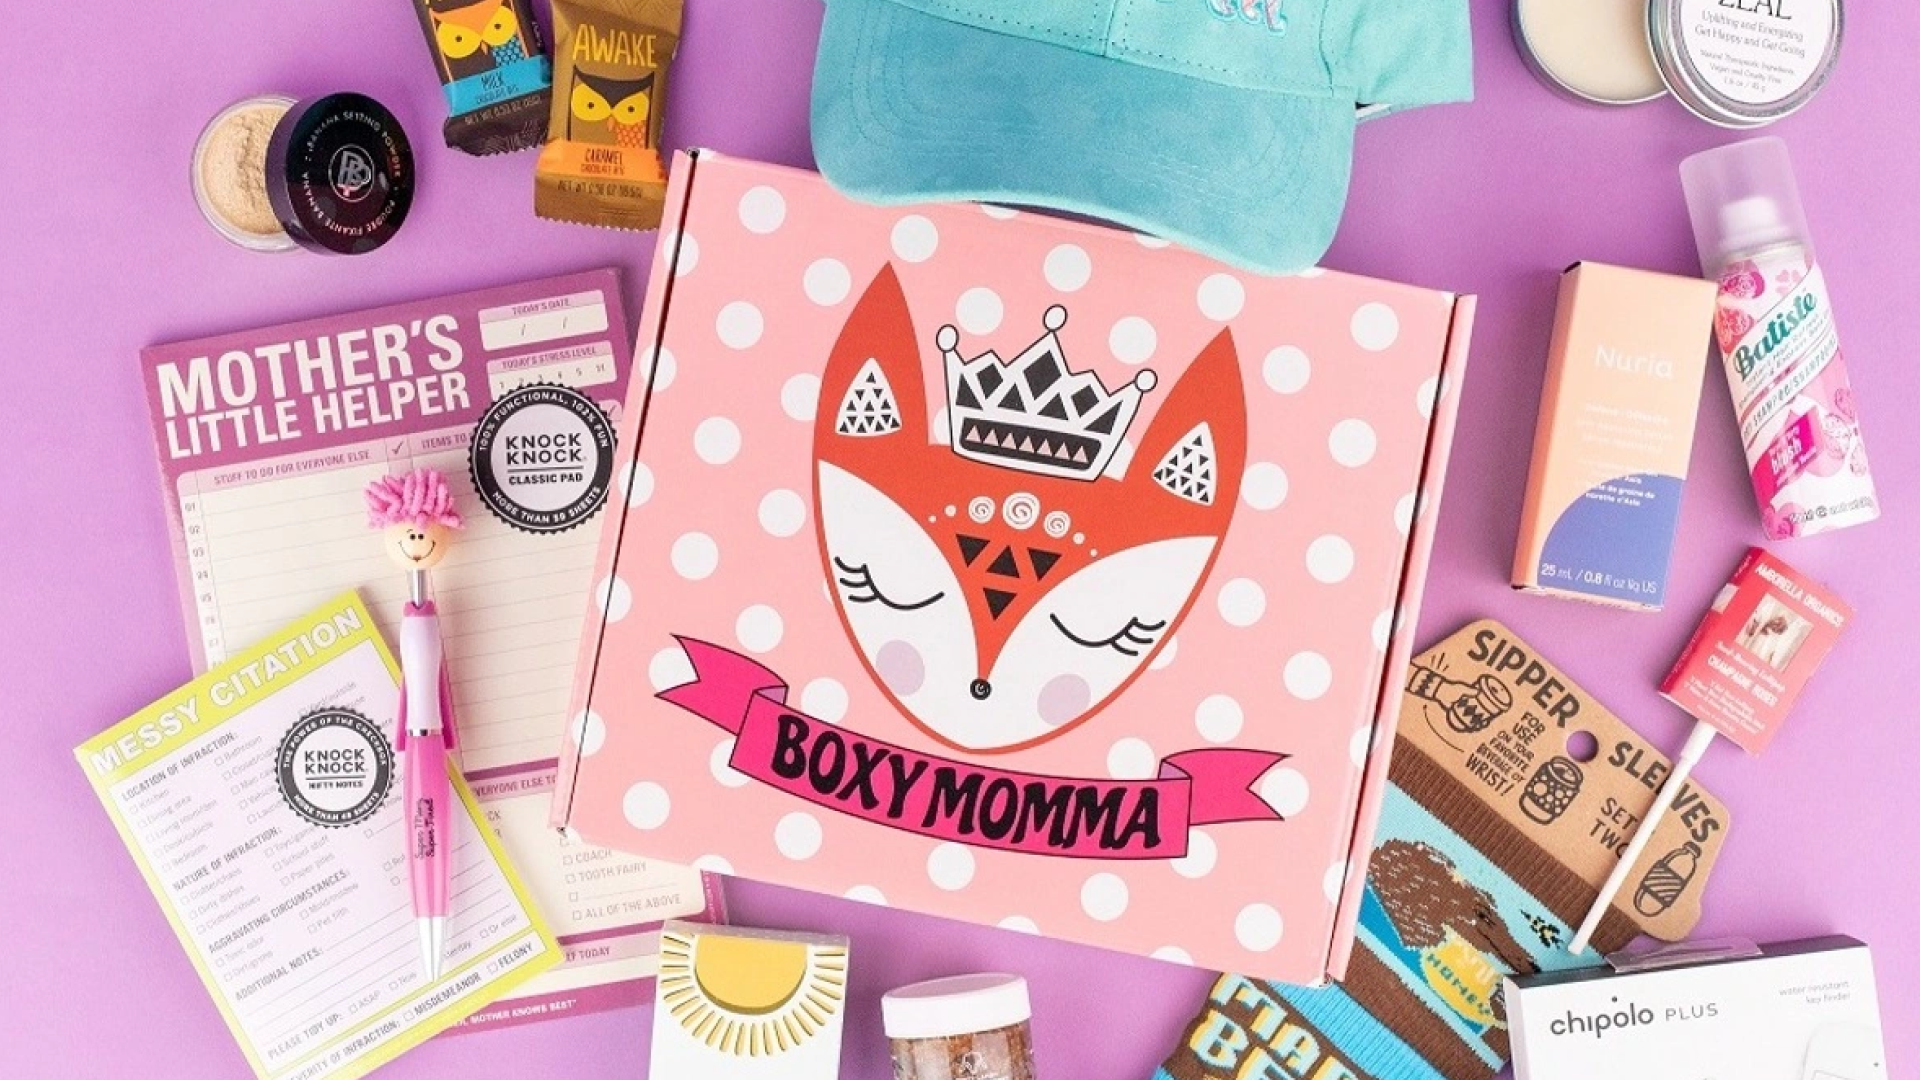 monthly subscription box for moms filled with goodies and sweet treats